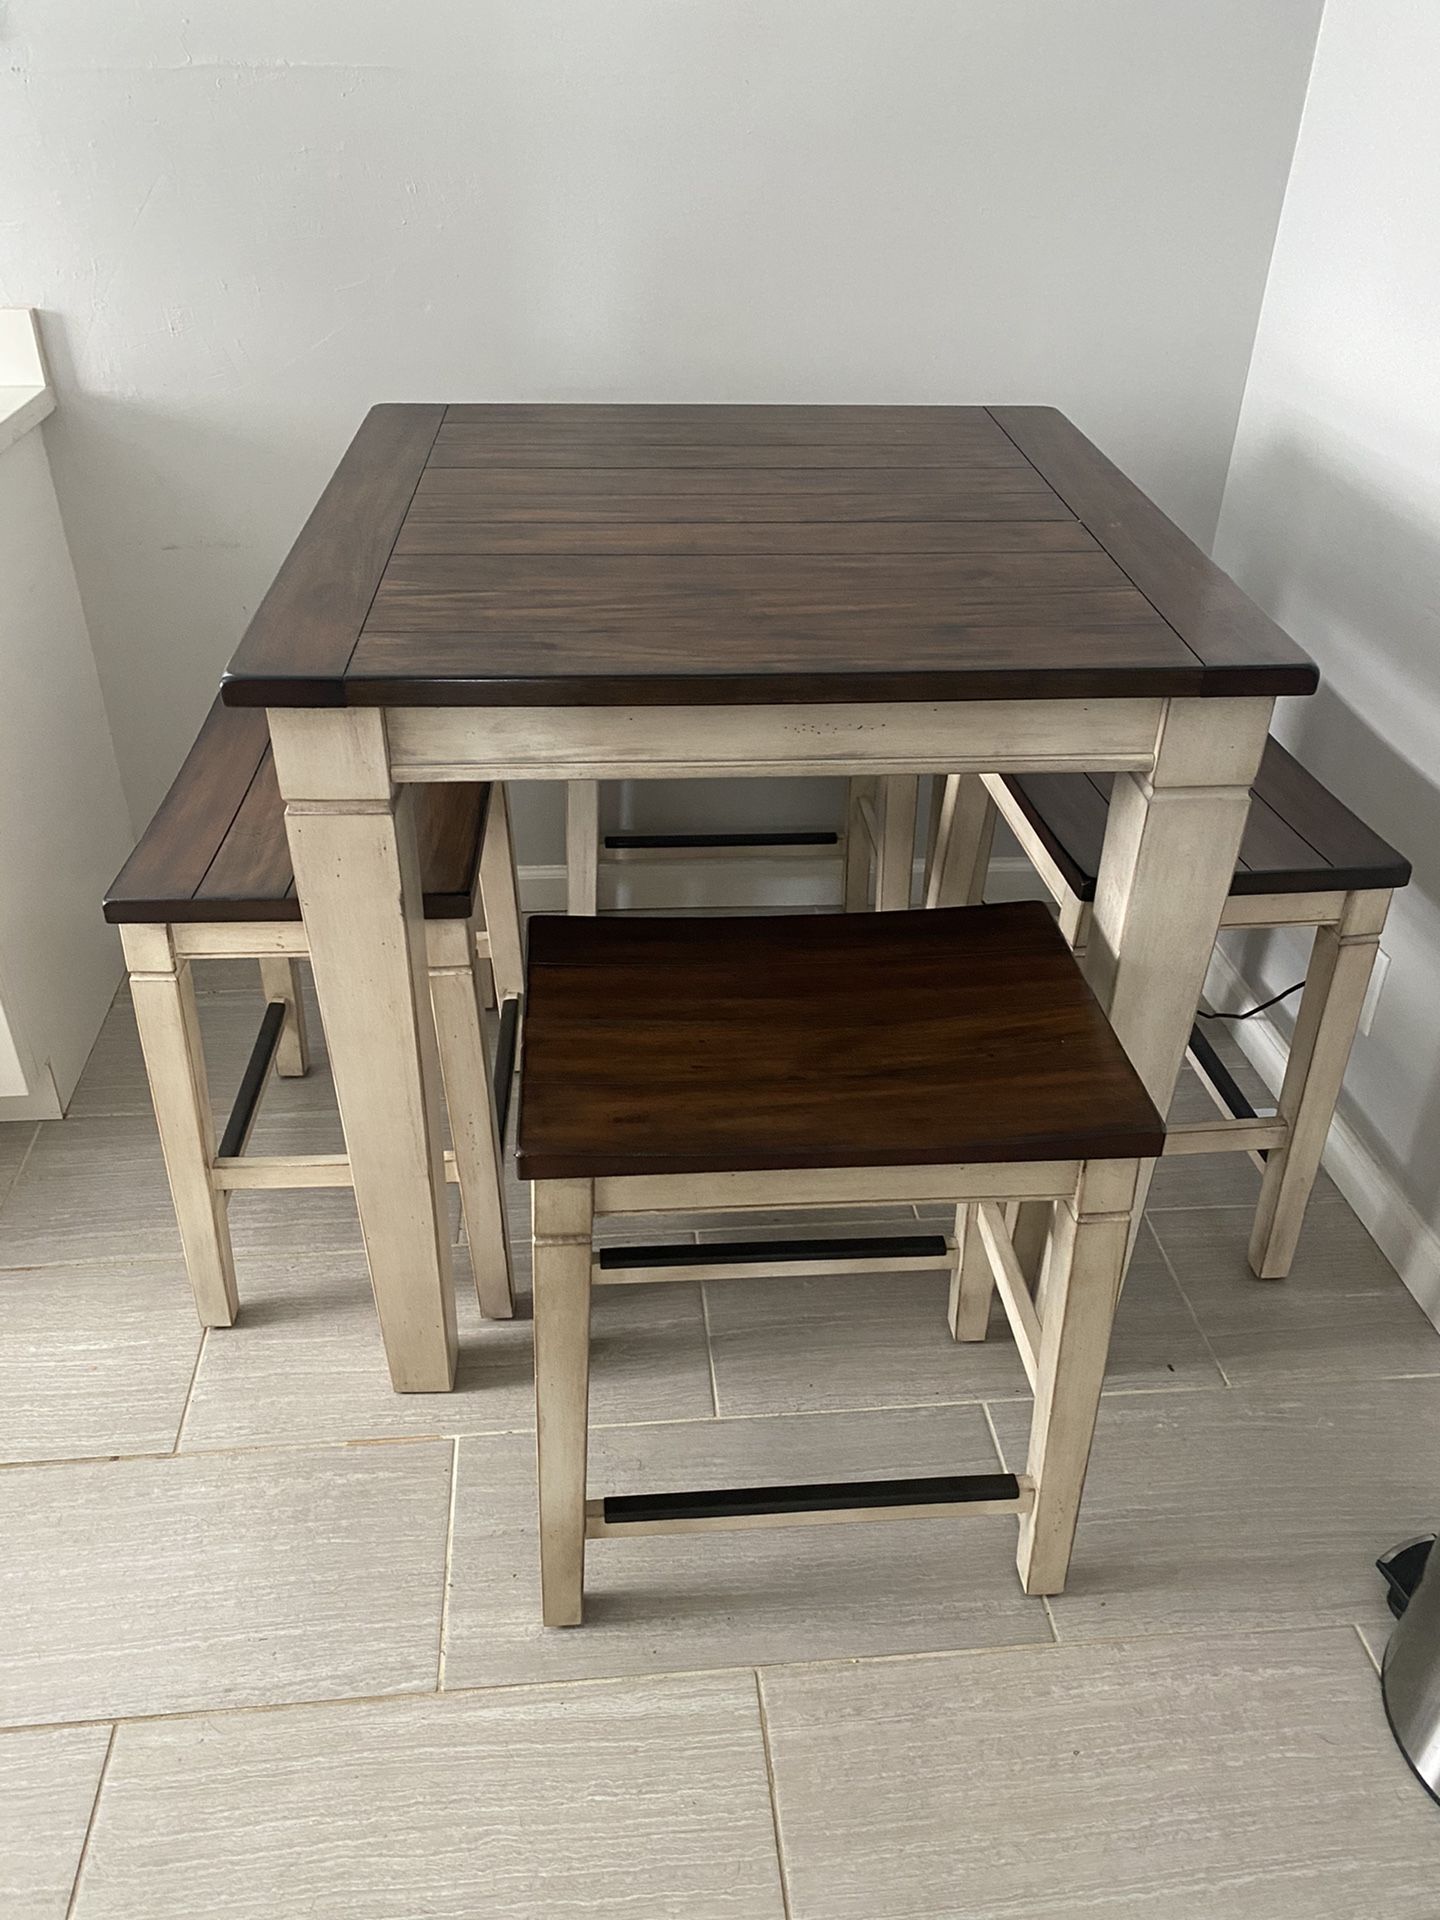 Kitchen Table with 4 chairs